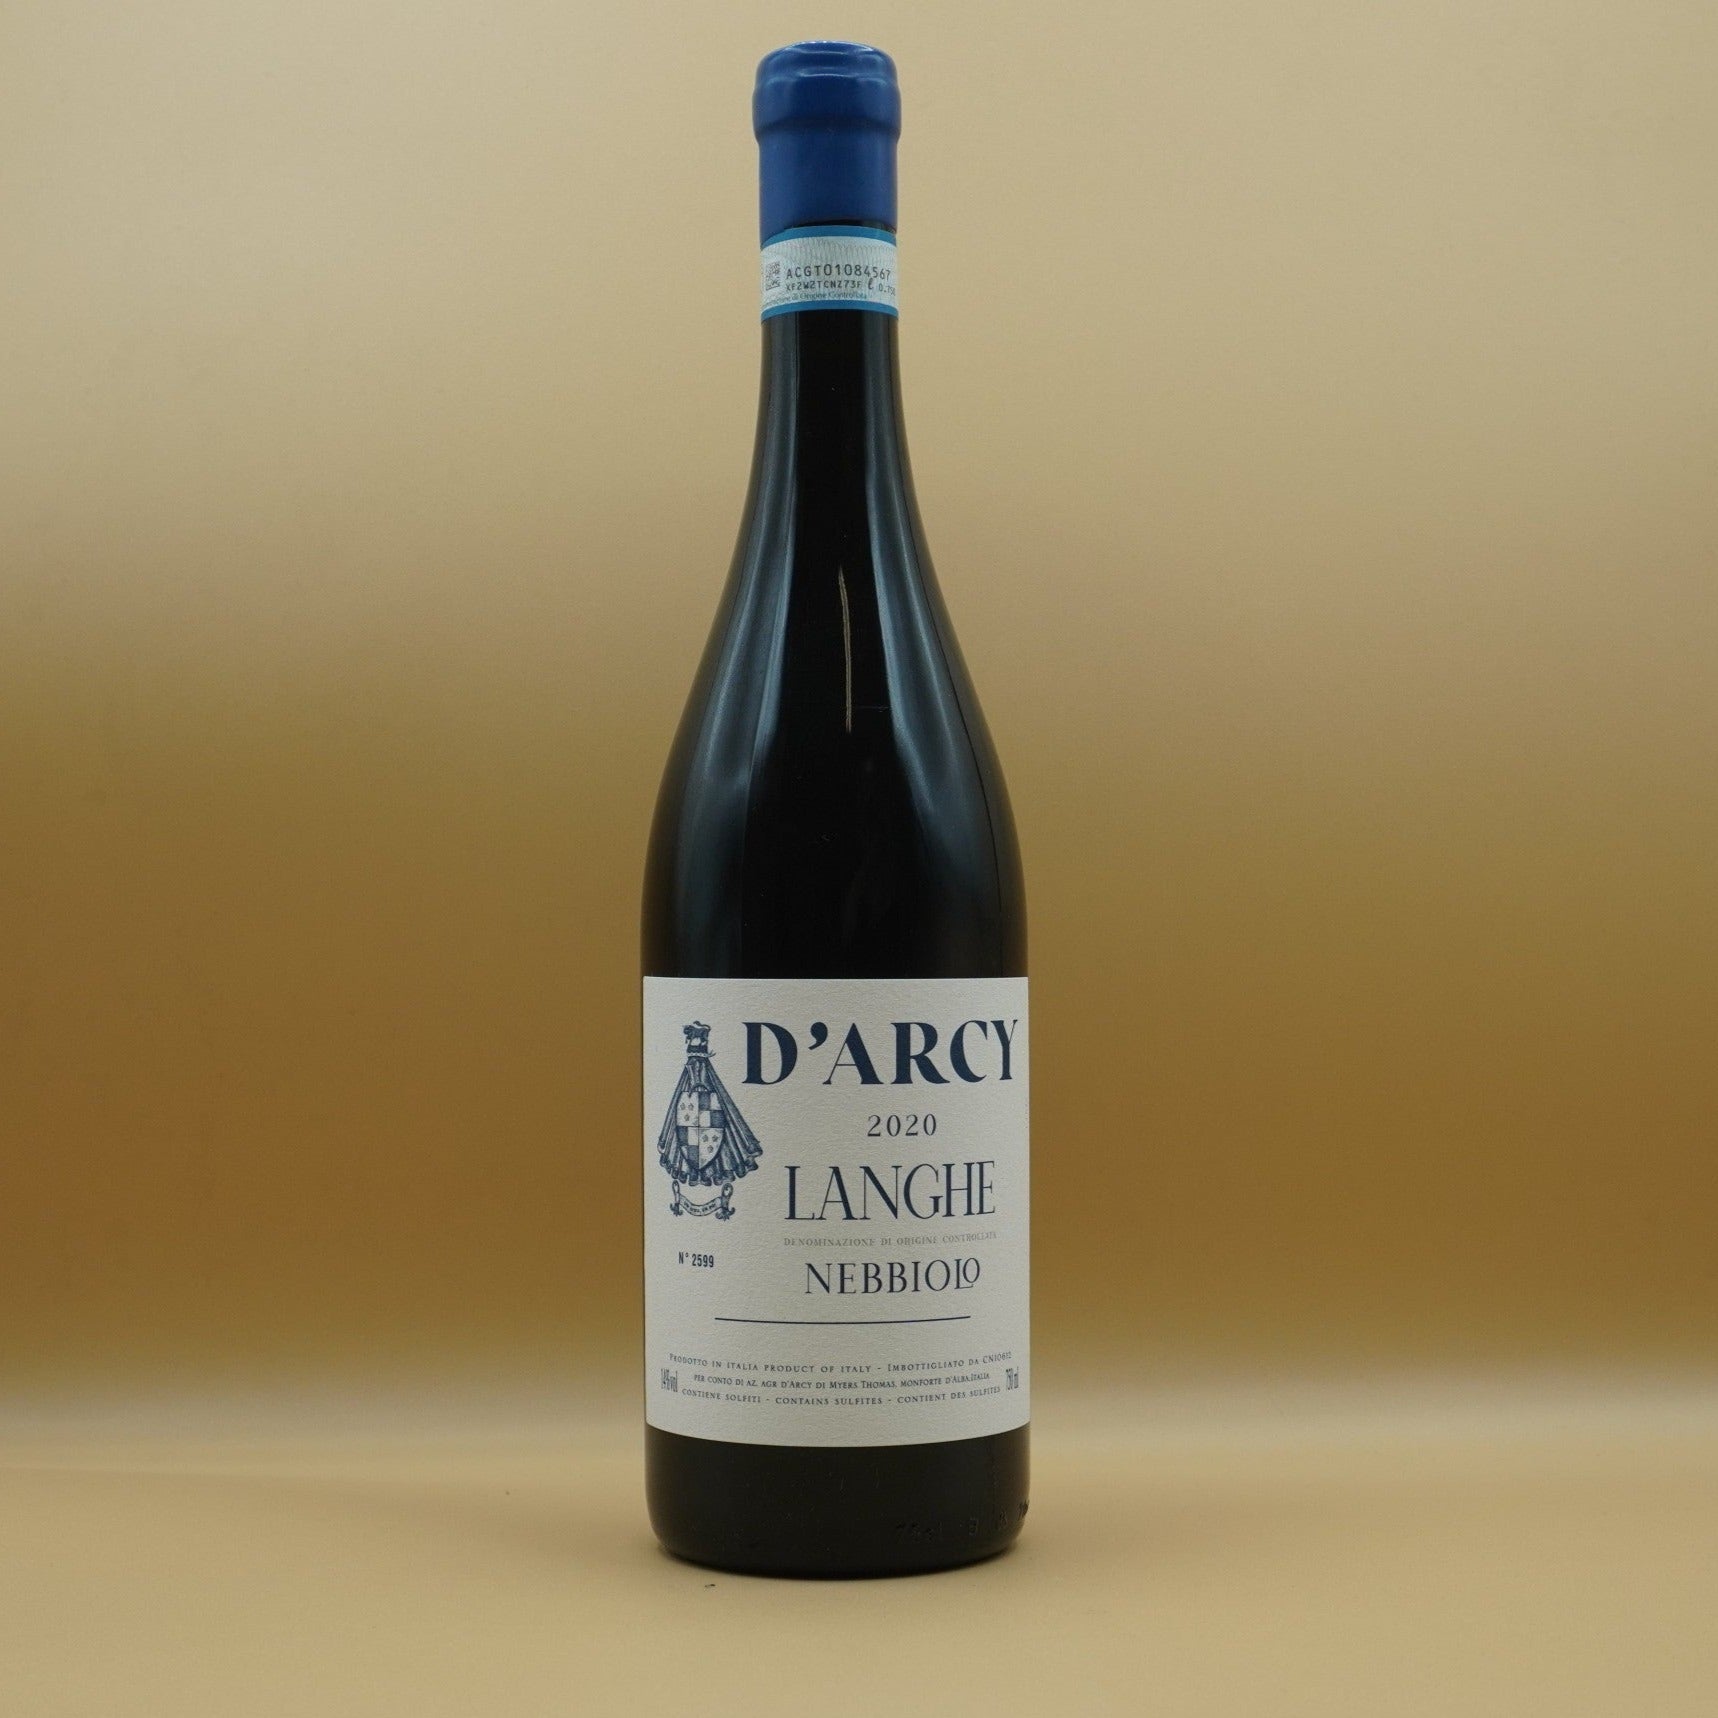 Cantina d'Arcy, Langhe Nebbiolo 2020